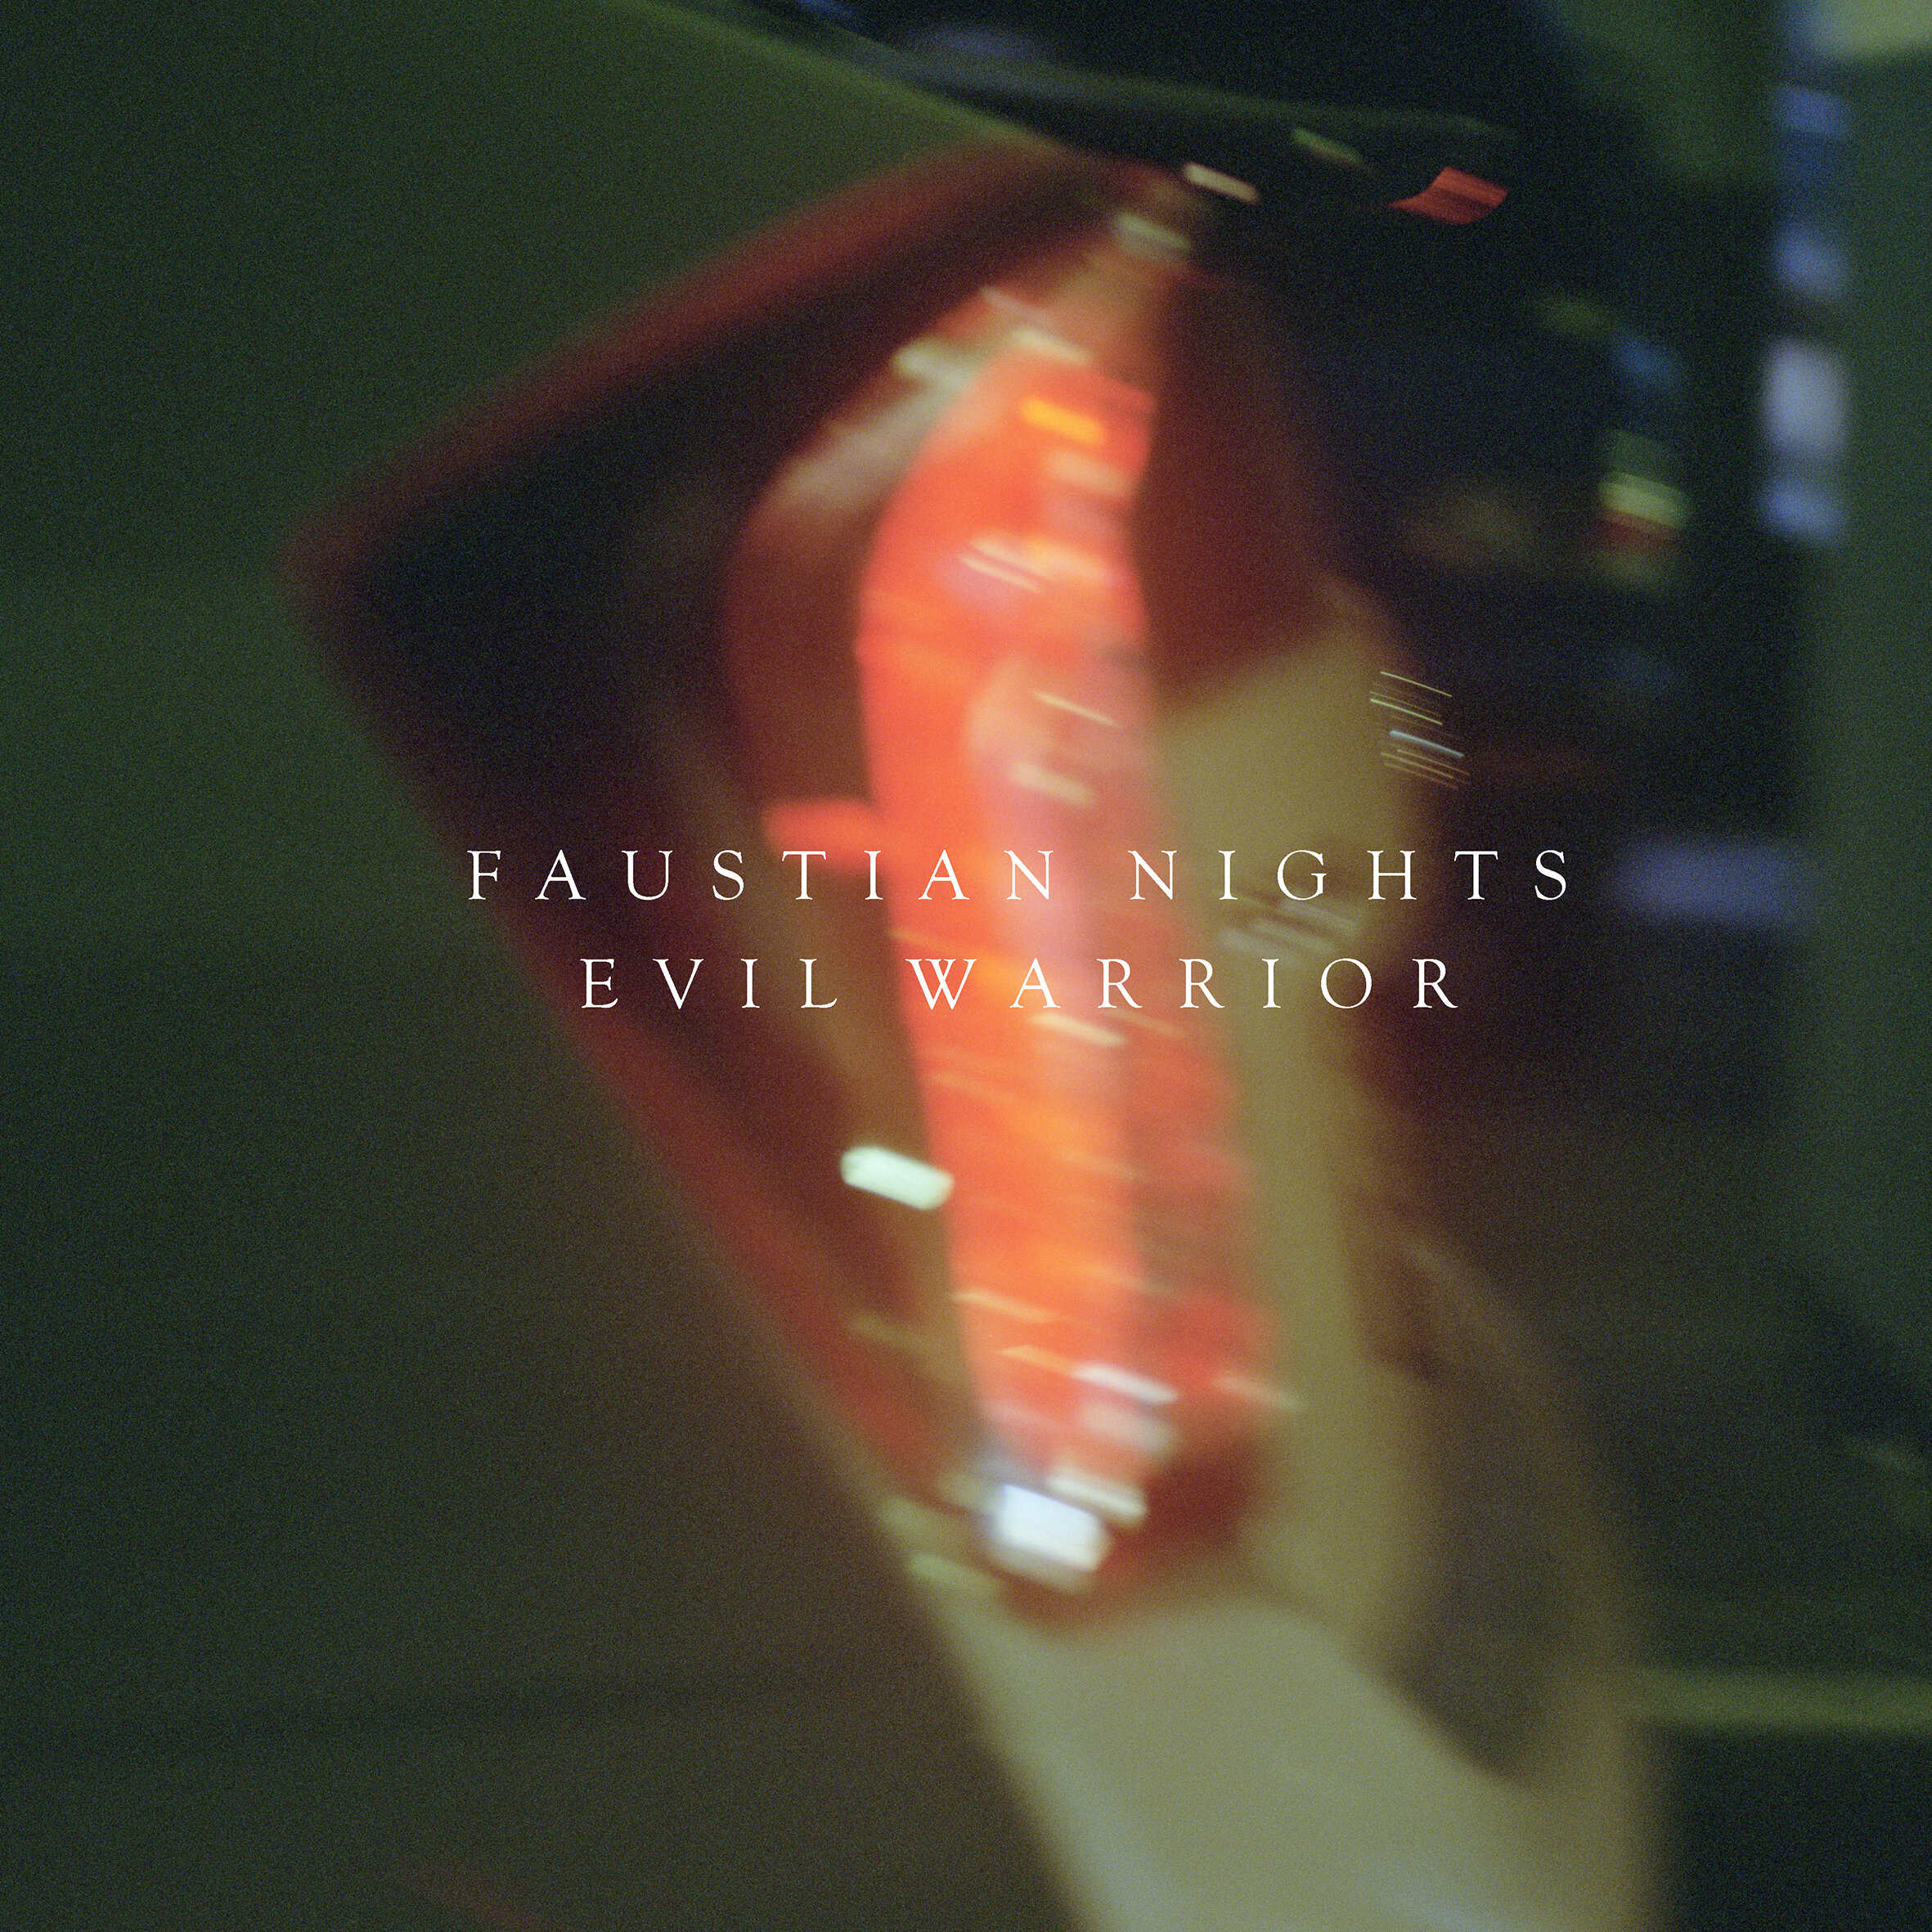  Front cover design  Faustian Nights, “Evil Warrior“   2019 